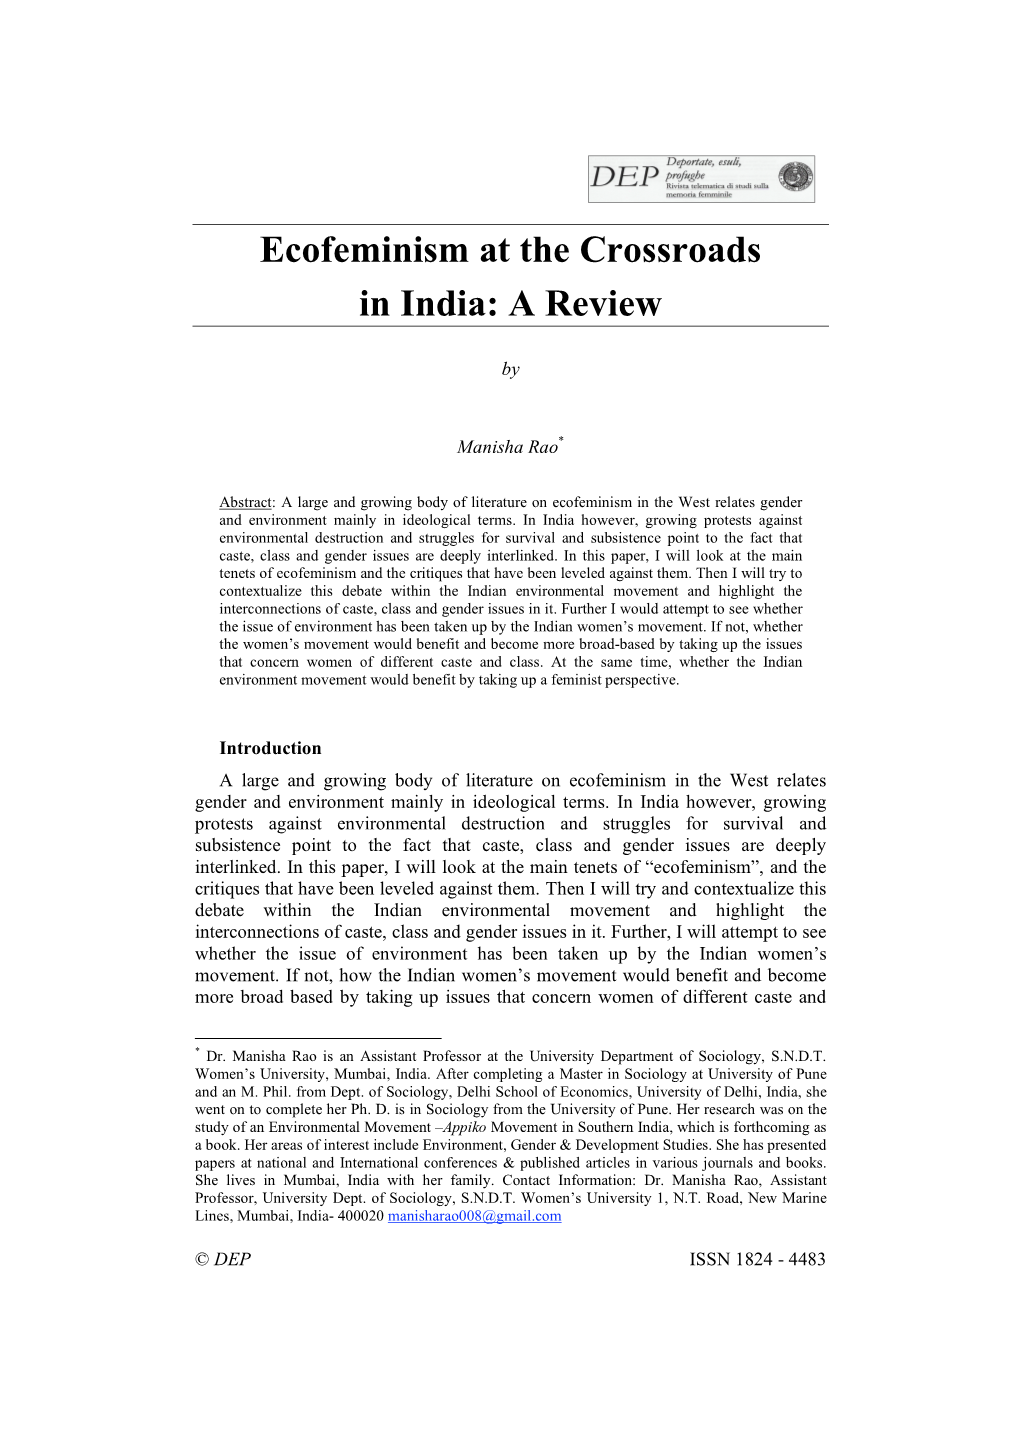 Ecofeminism at the Crossroads in India: a Review